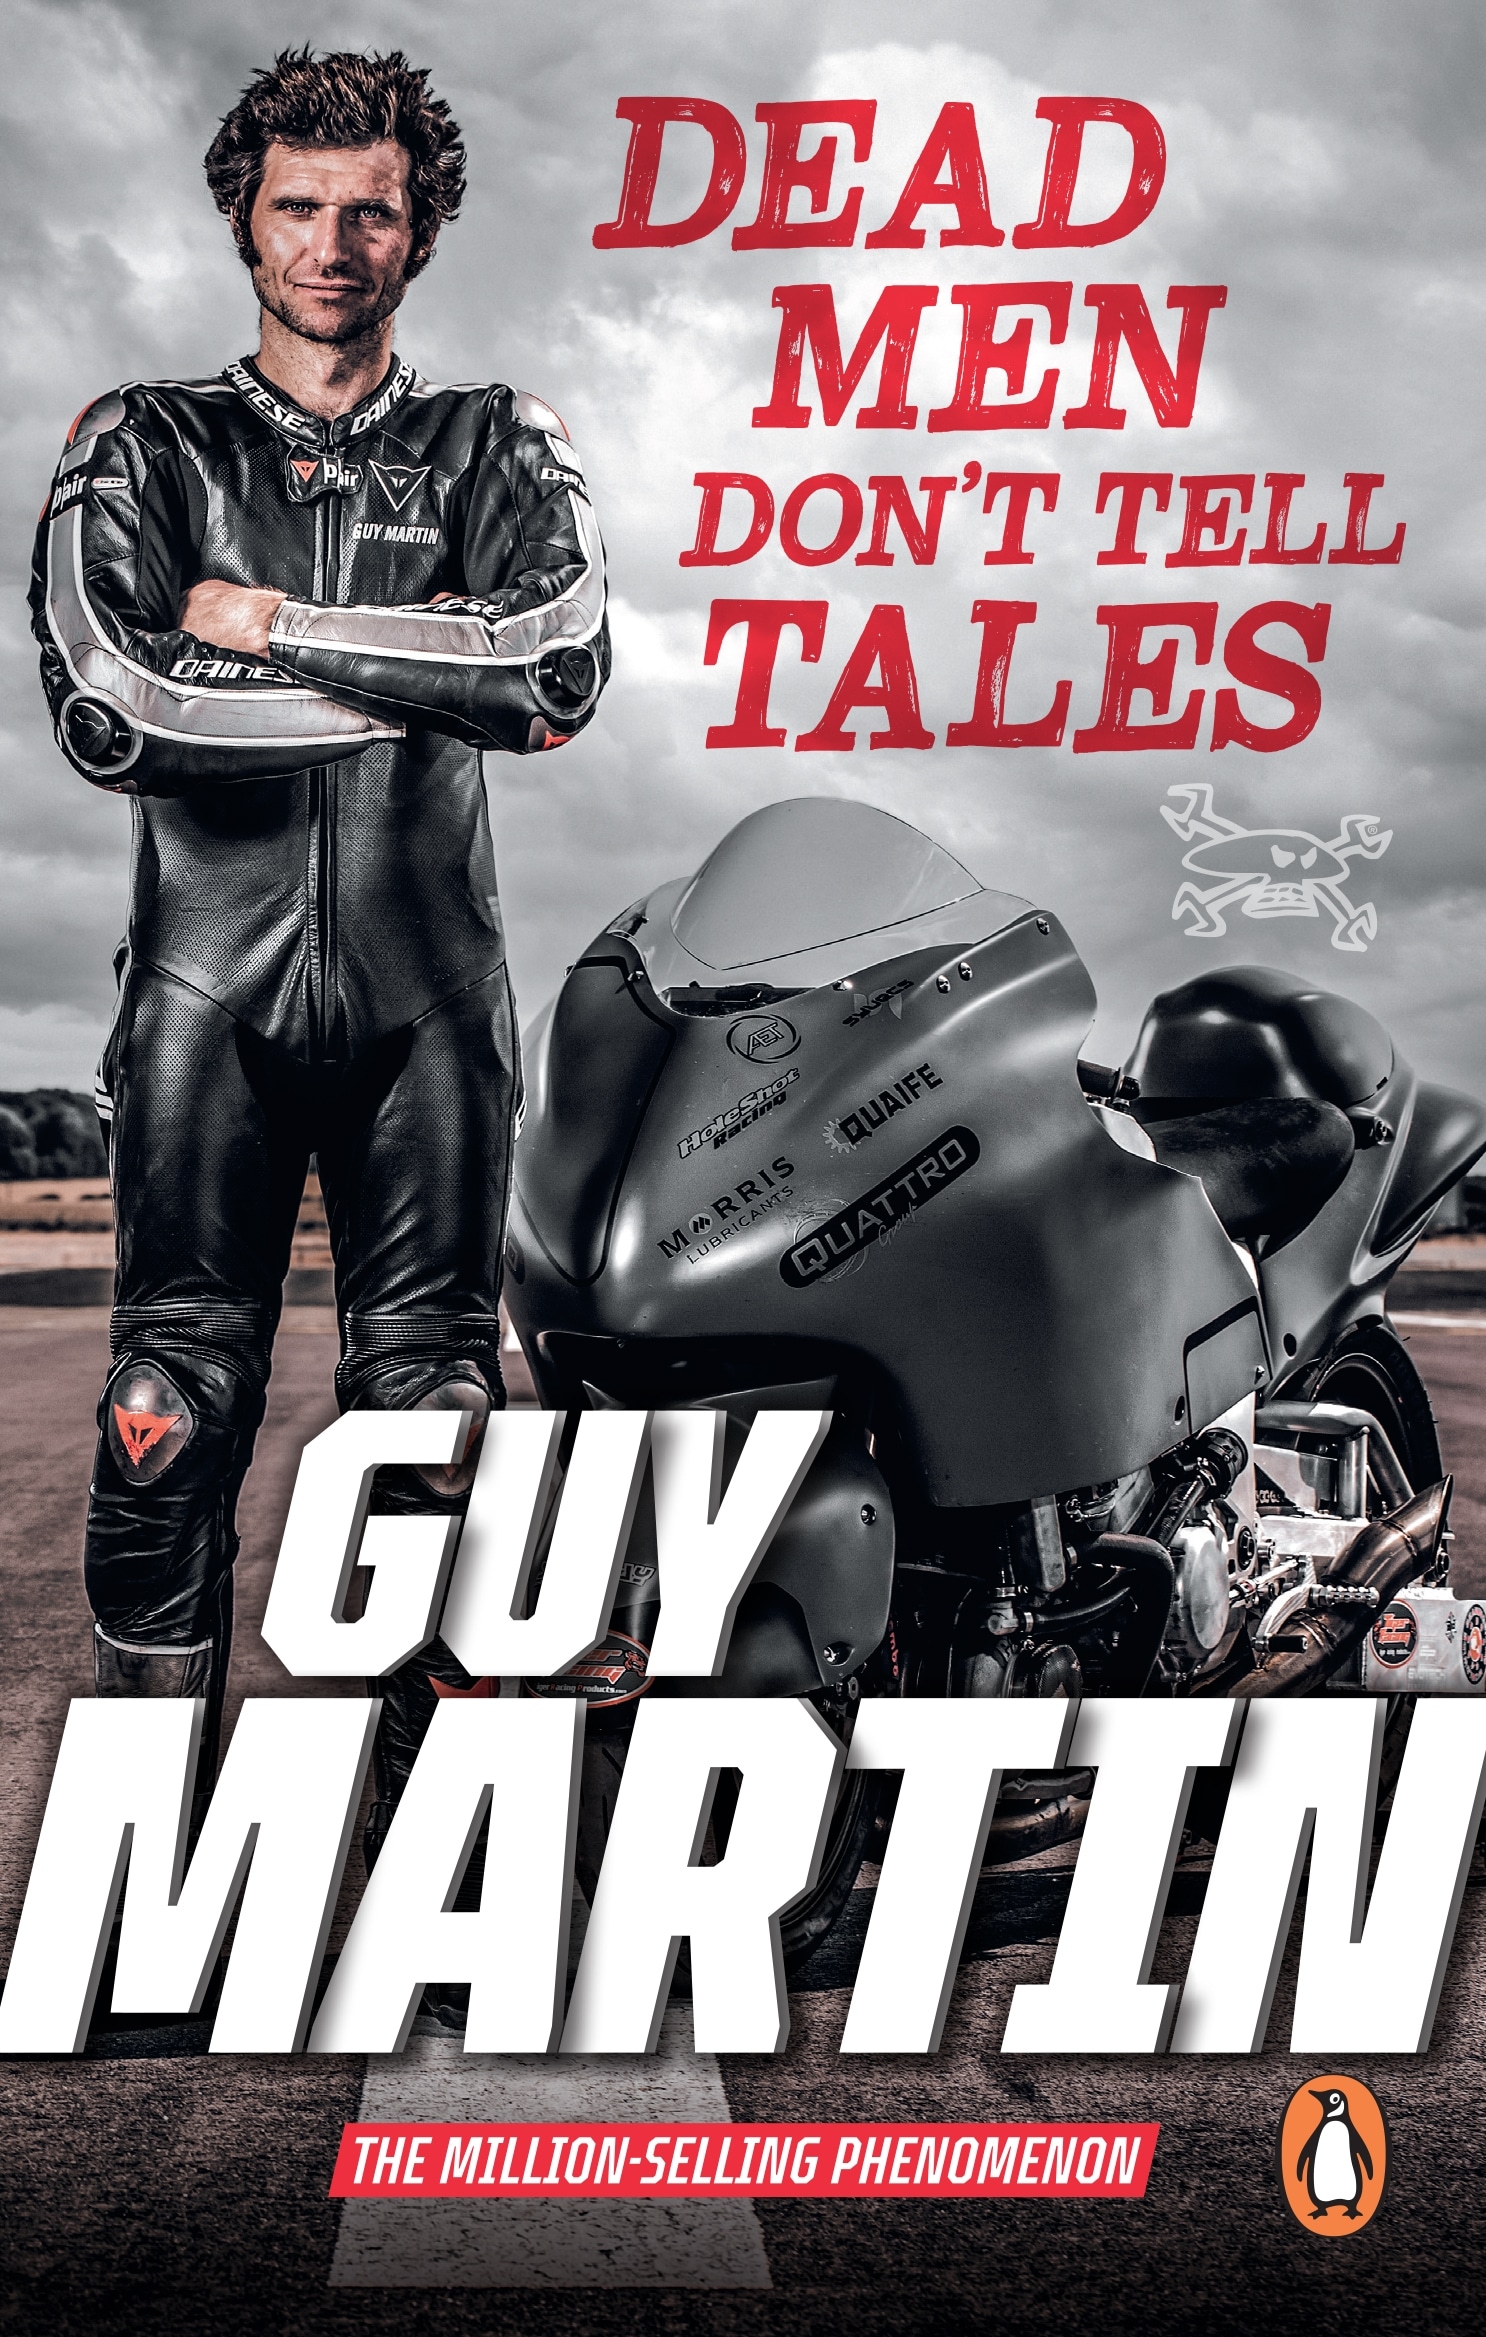 Book “Dead Men Don't Tell Tales” by Guy Martin — April 28, 2022